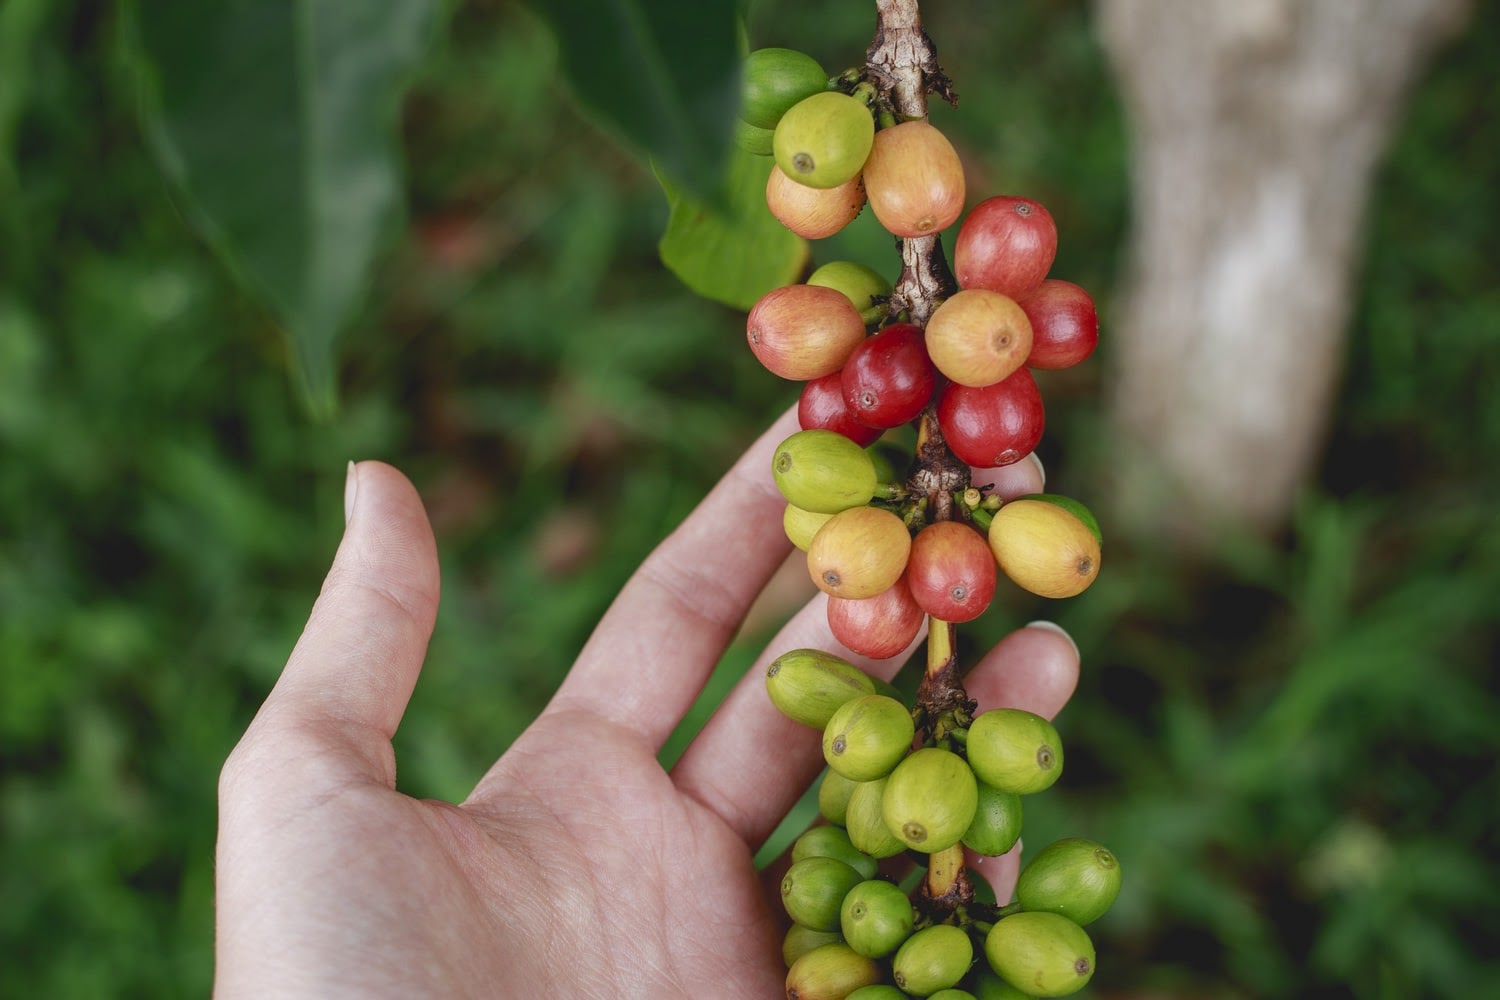 Where do so many types of decaf coffee come from on the island